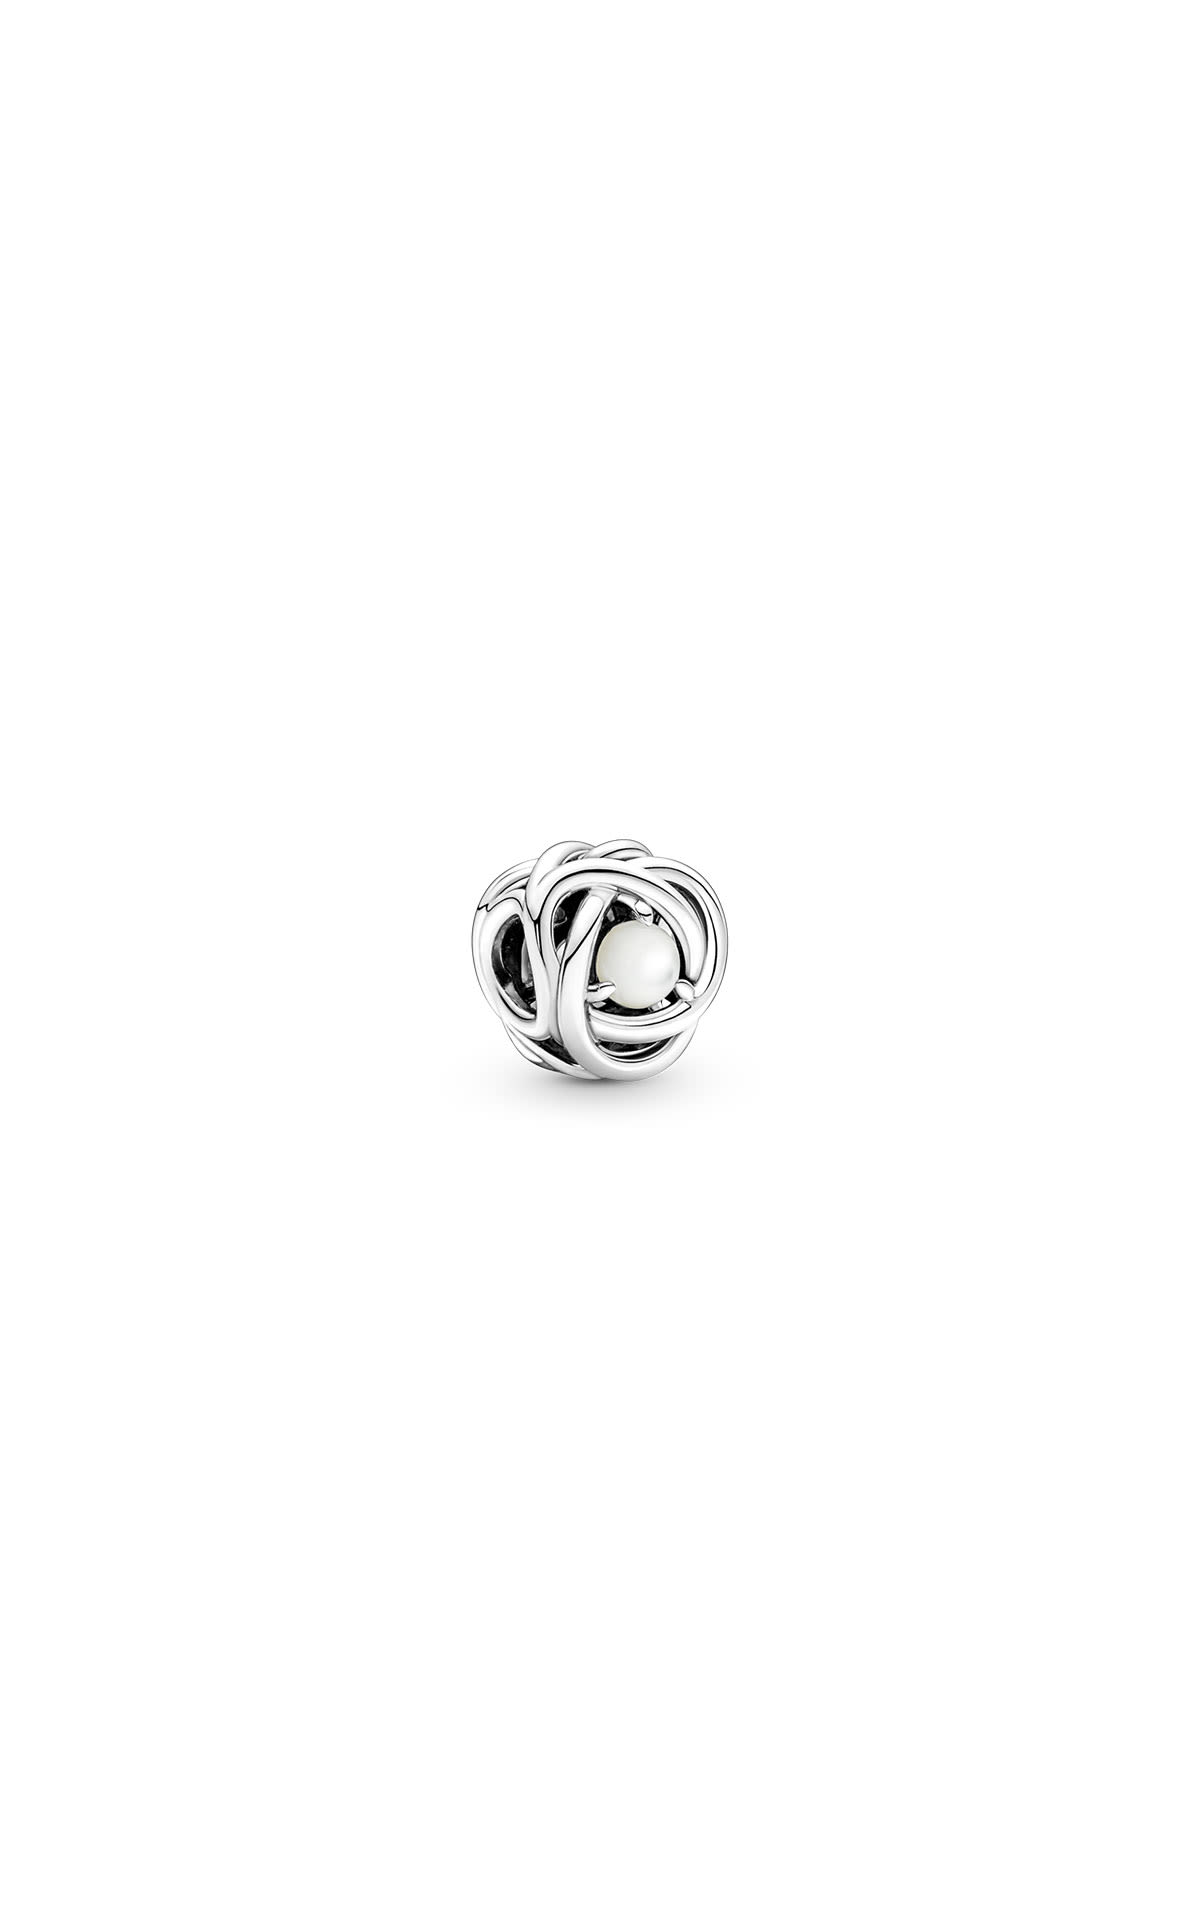 Pandora Sterling silver birthstone charm June white mother of pearl from Bicester Village